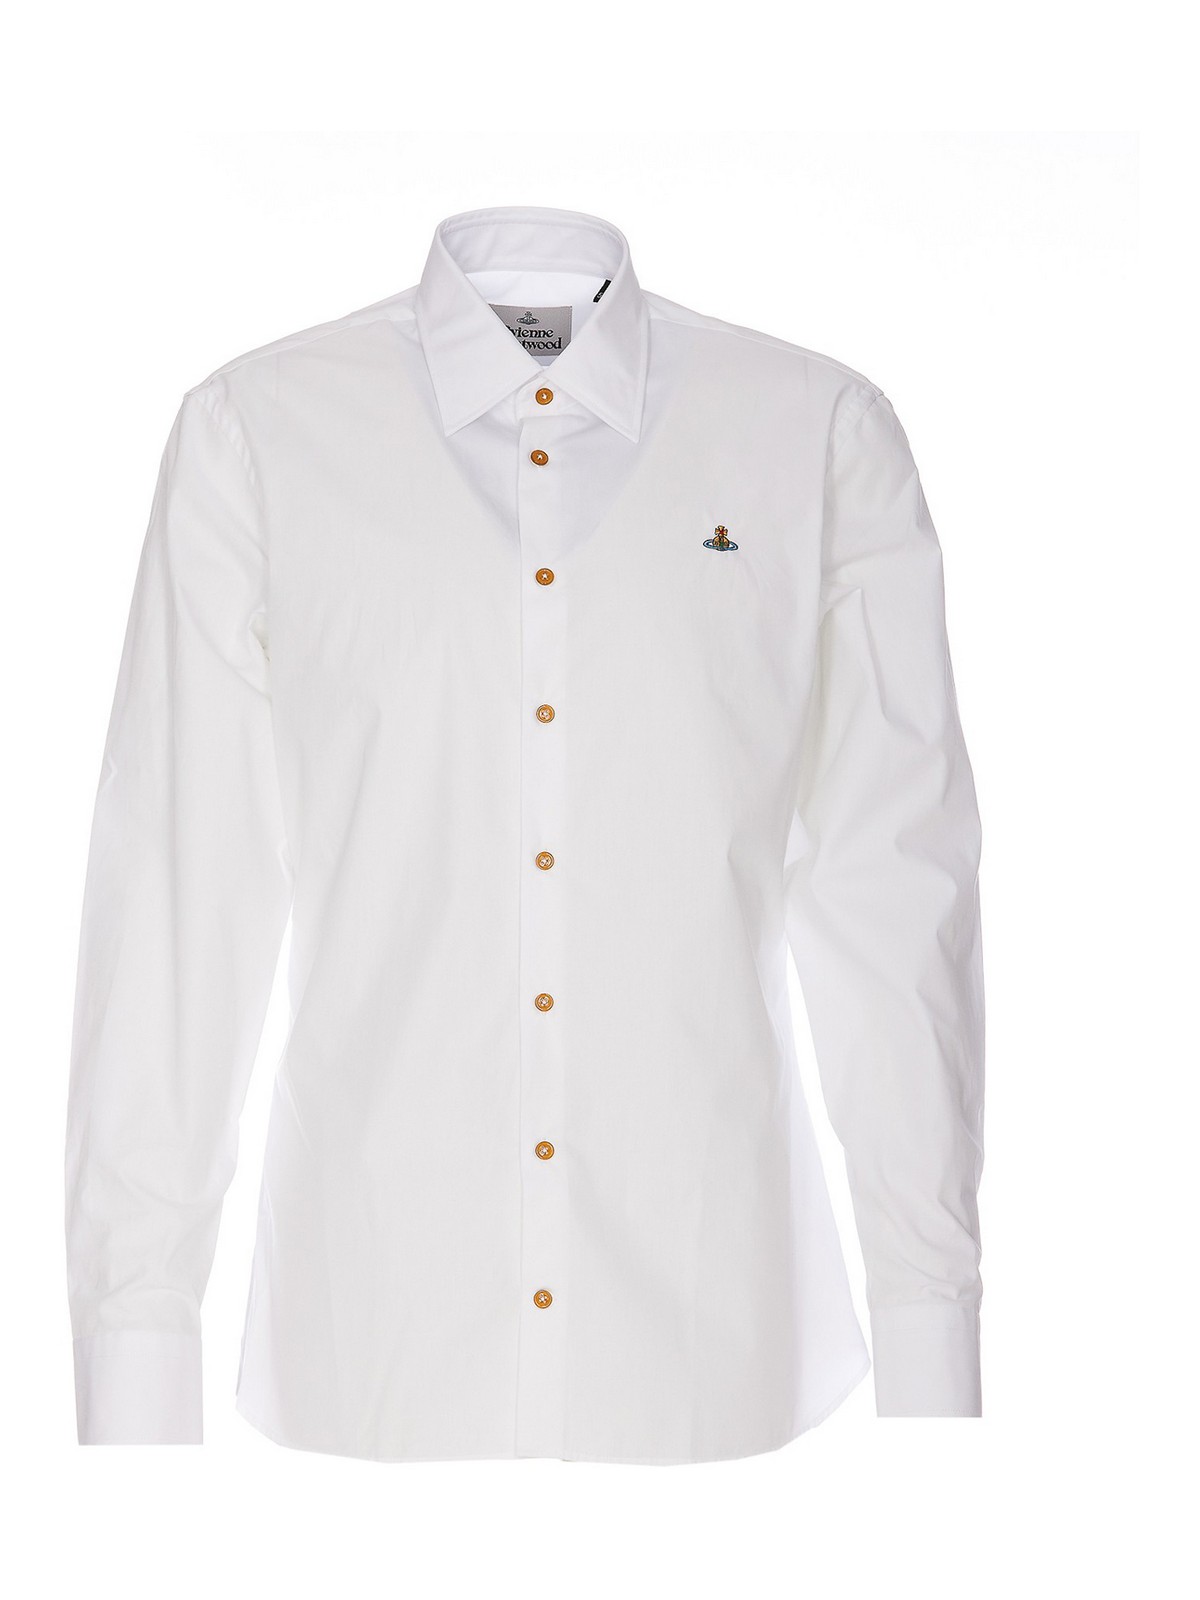 Vivienne Westwood Ghost Shirt In White